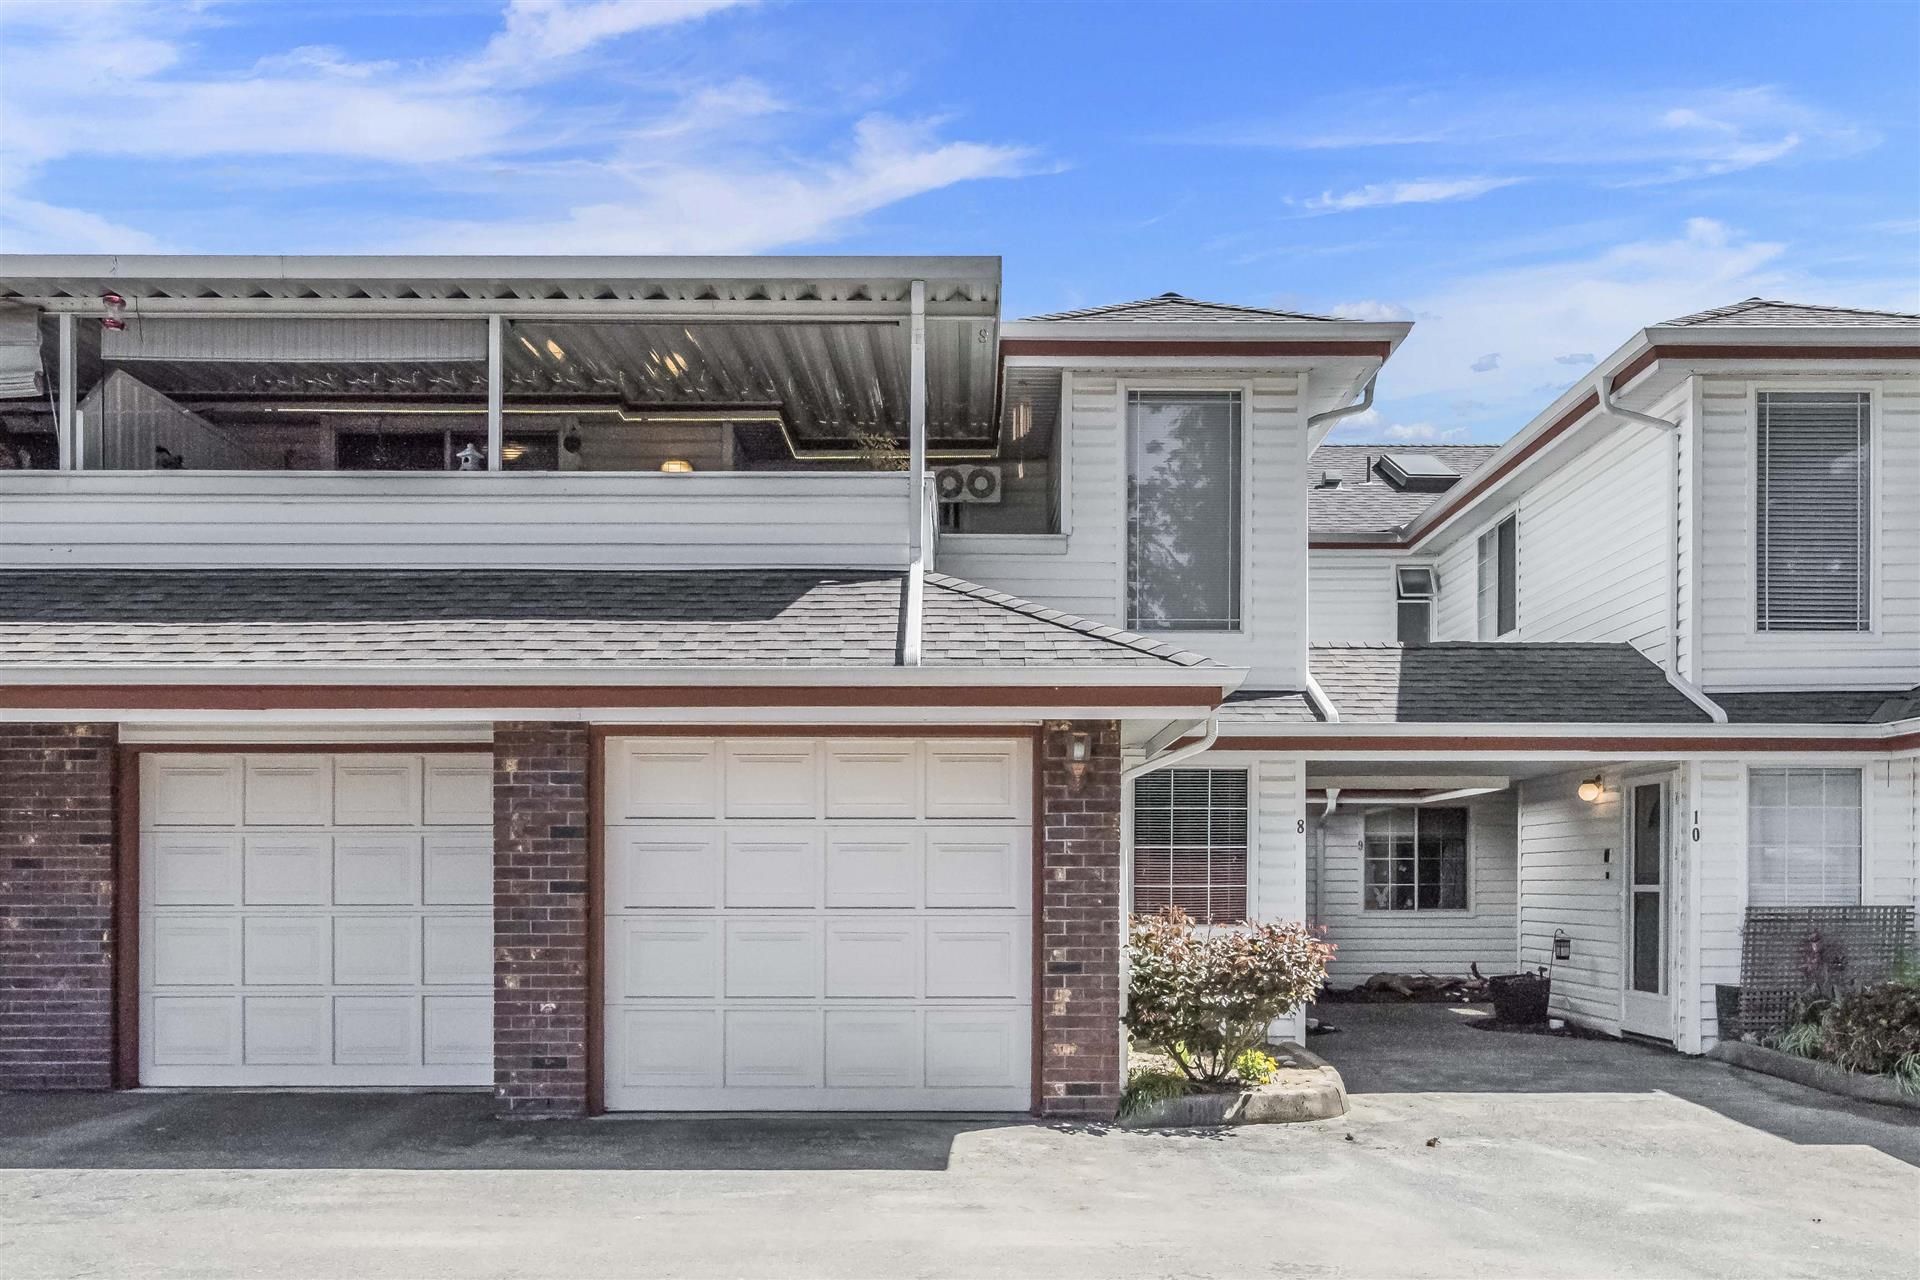 Open House. Open House on Saturday, May 11, 2019 12:00PM - 2:00PM